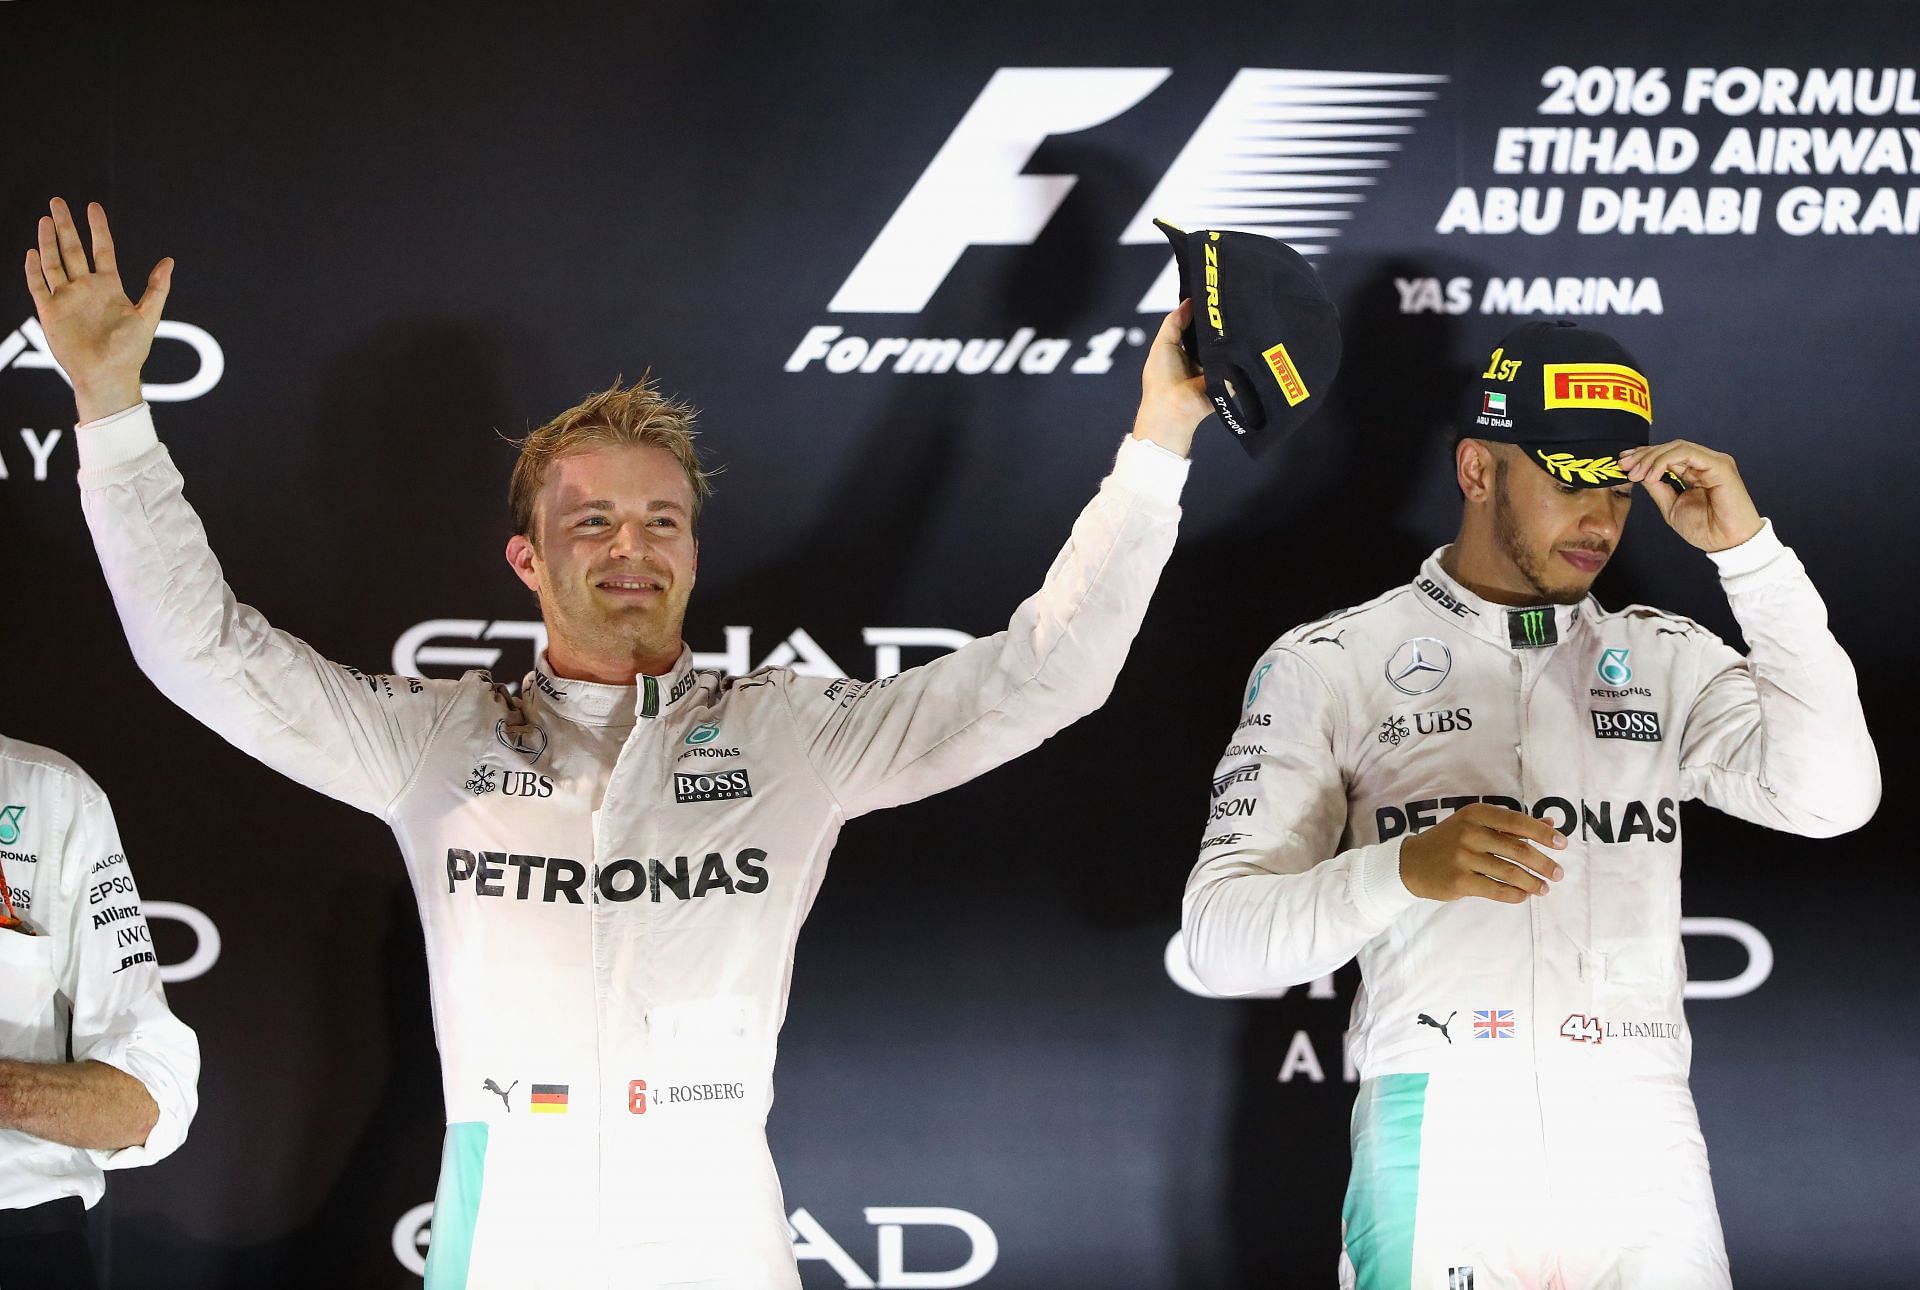 Nico Rosberg praised Max Verstappen after his thrilling win at the Yas Marina circuit